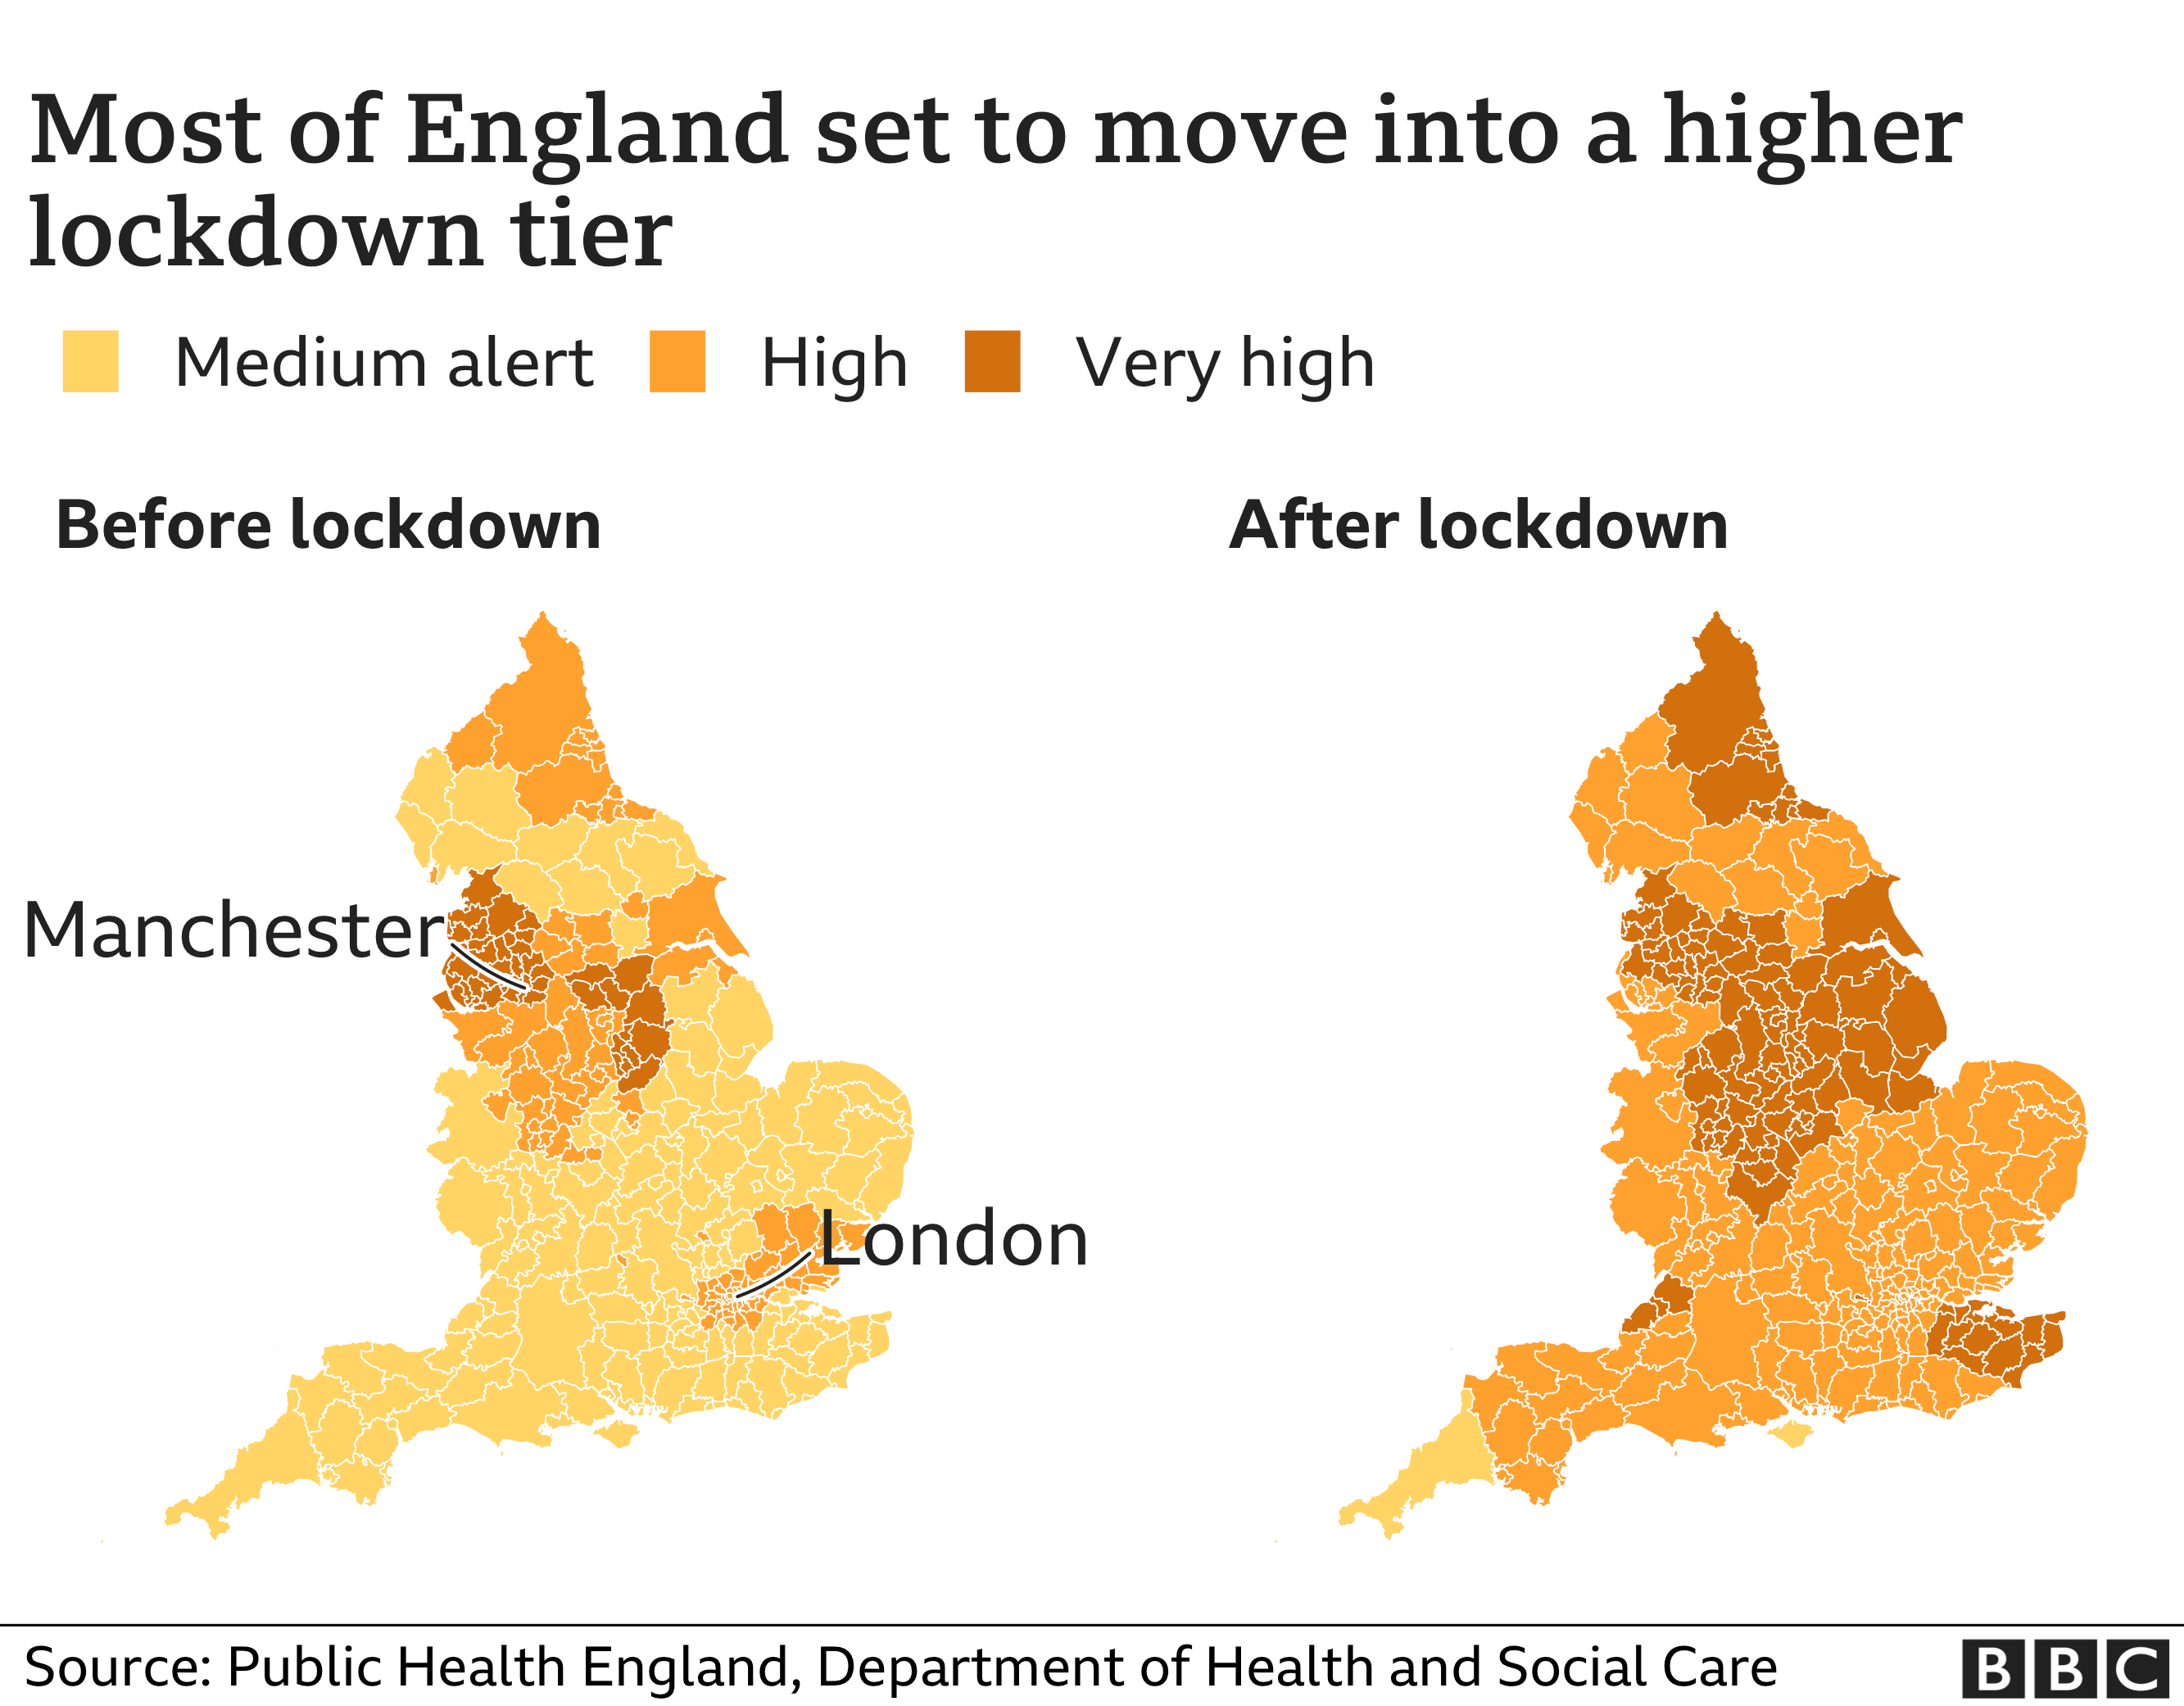 Two maps showing before and after lockdown tiers across local authorities in England. The local authorities comprising London are small and difficult to see clearly.